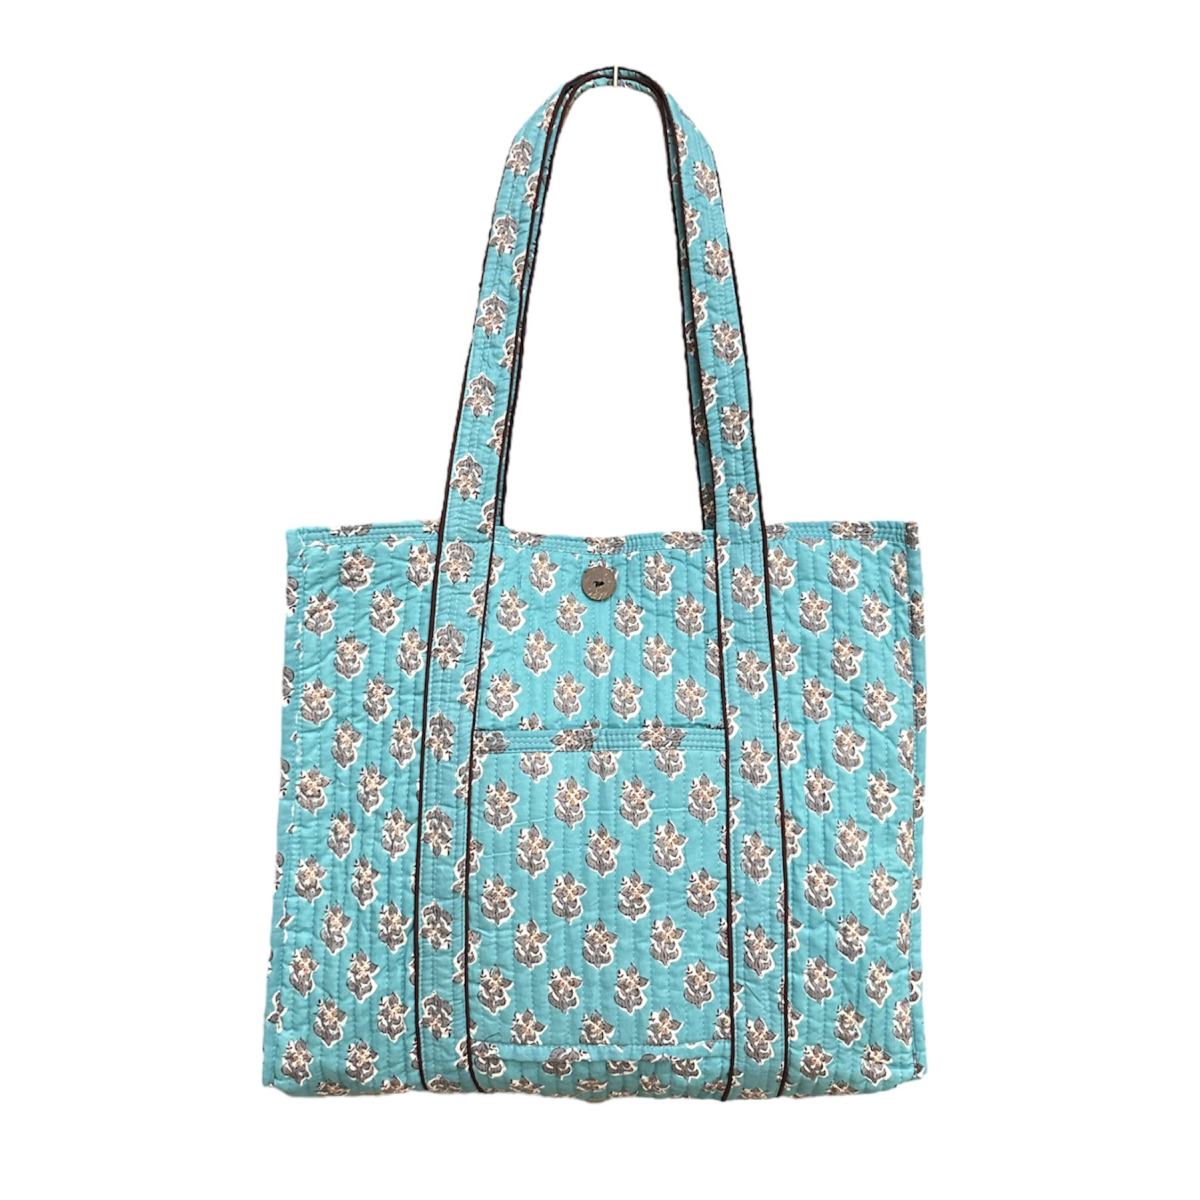 Block Printed Cotton Quilted Bag - Blue Turquoise